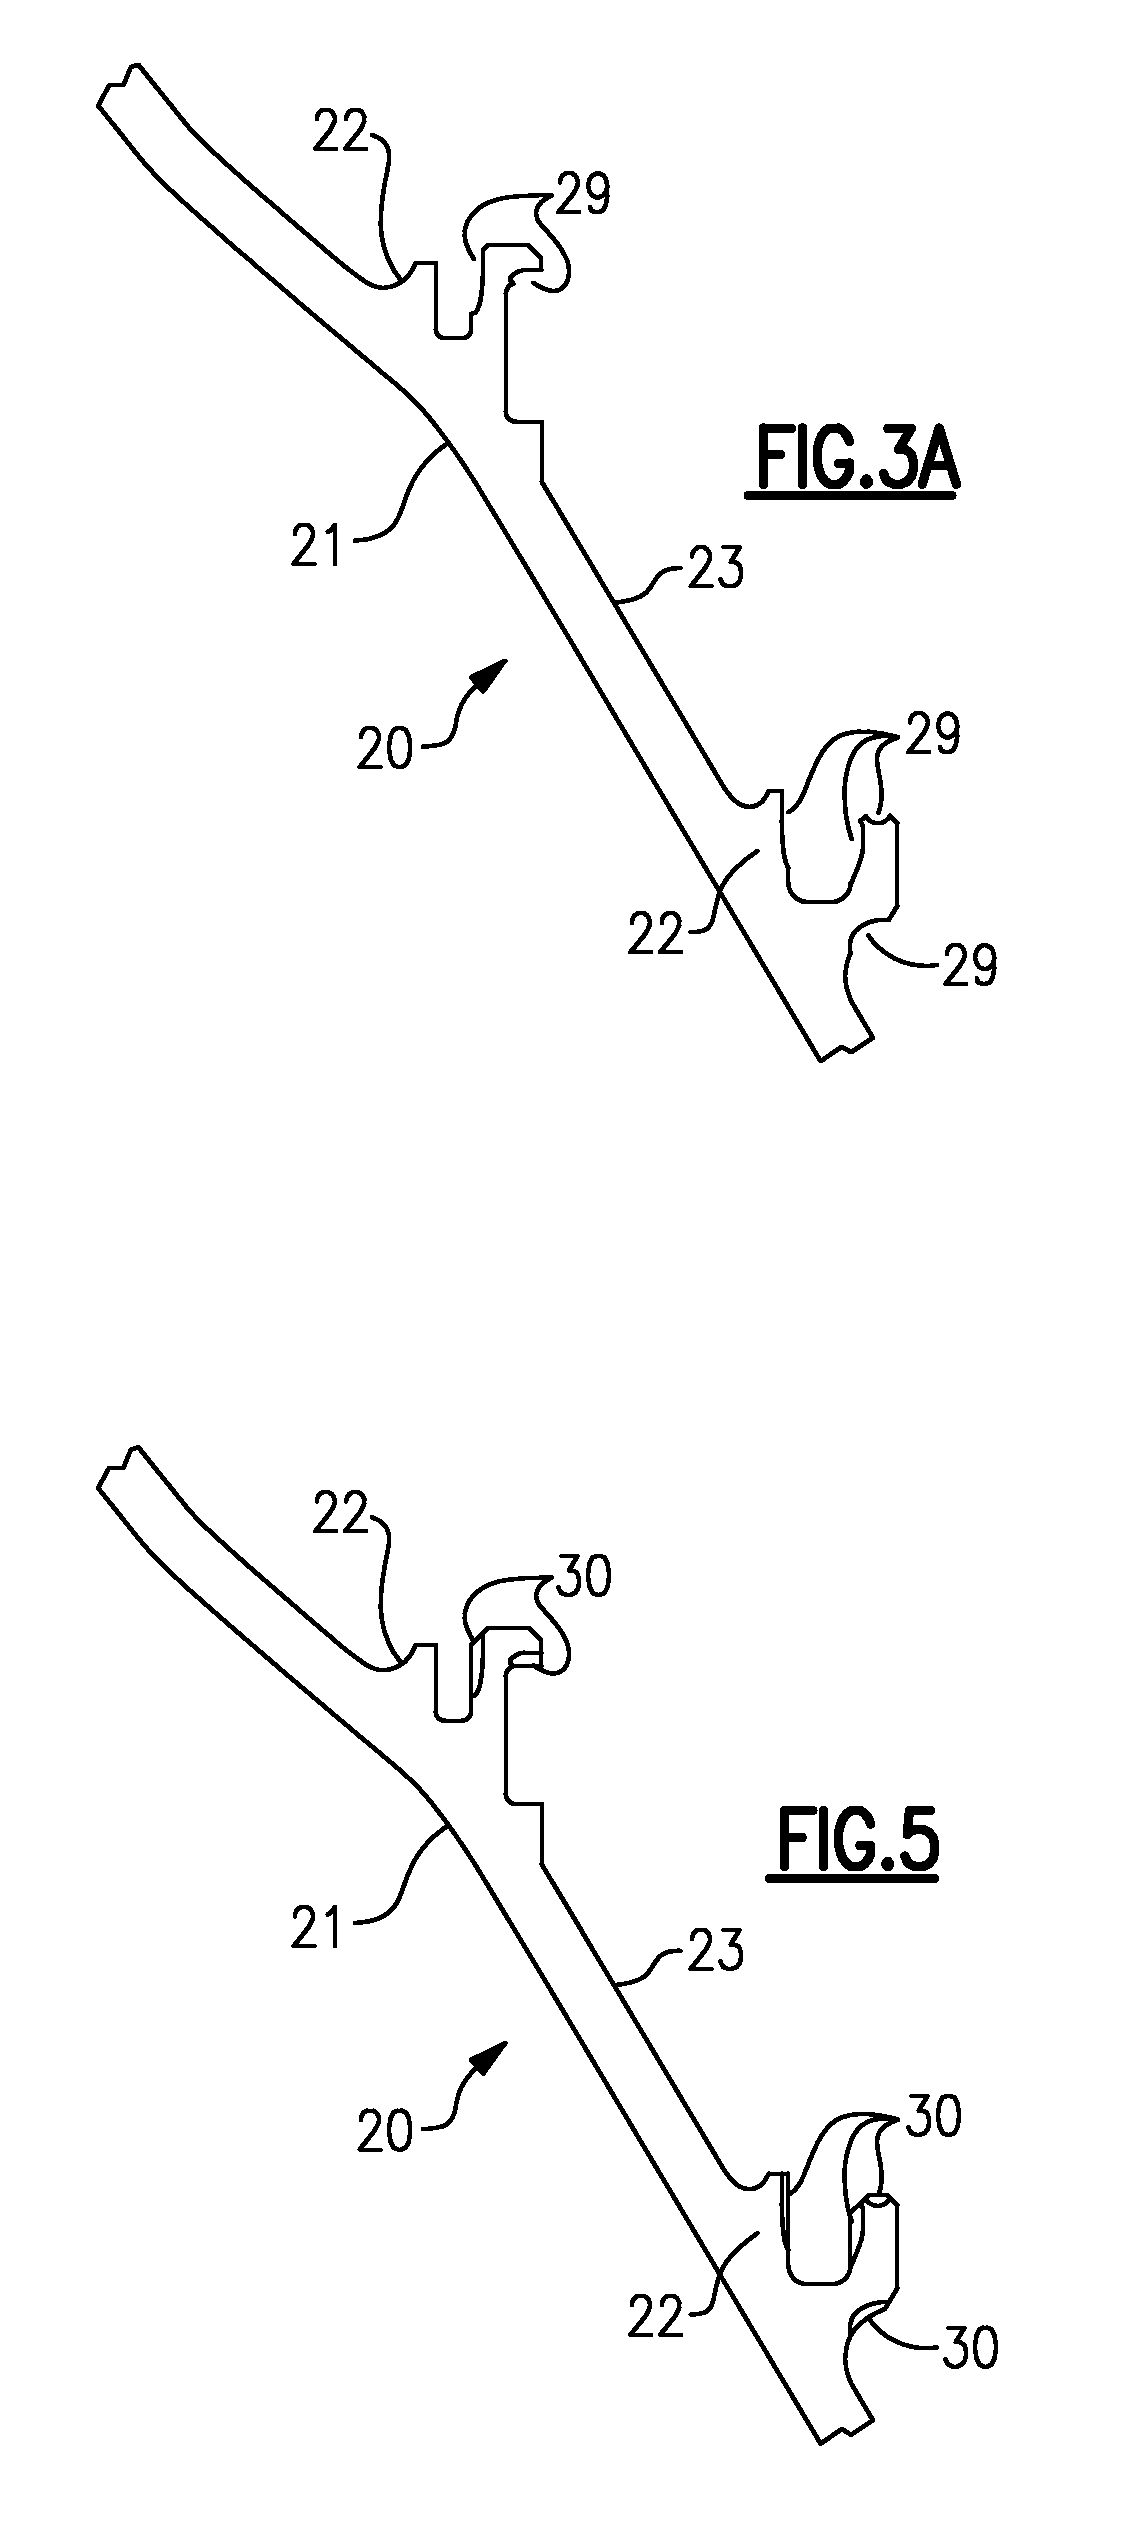 Repaired internal holding structures for gas turbine engine cases and method of repairing the same